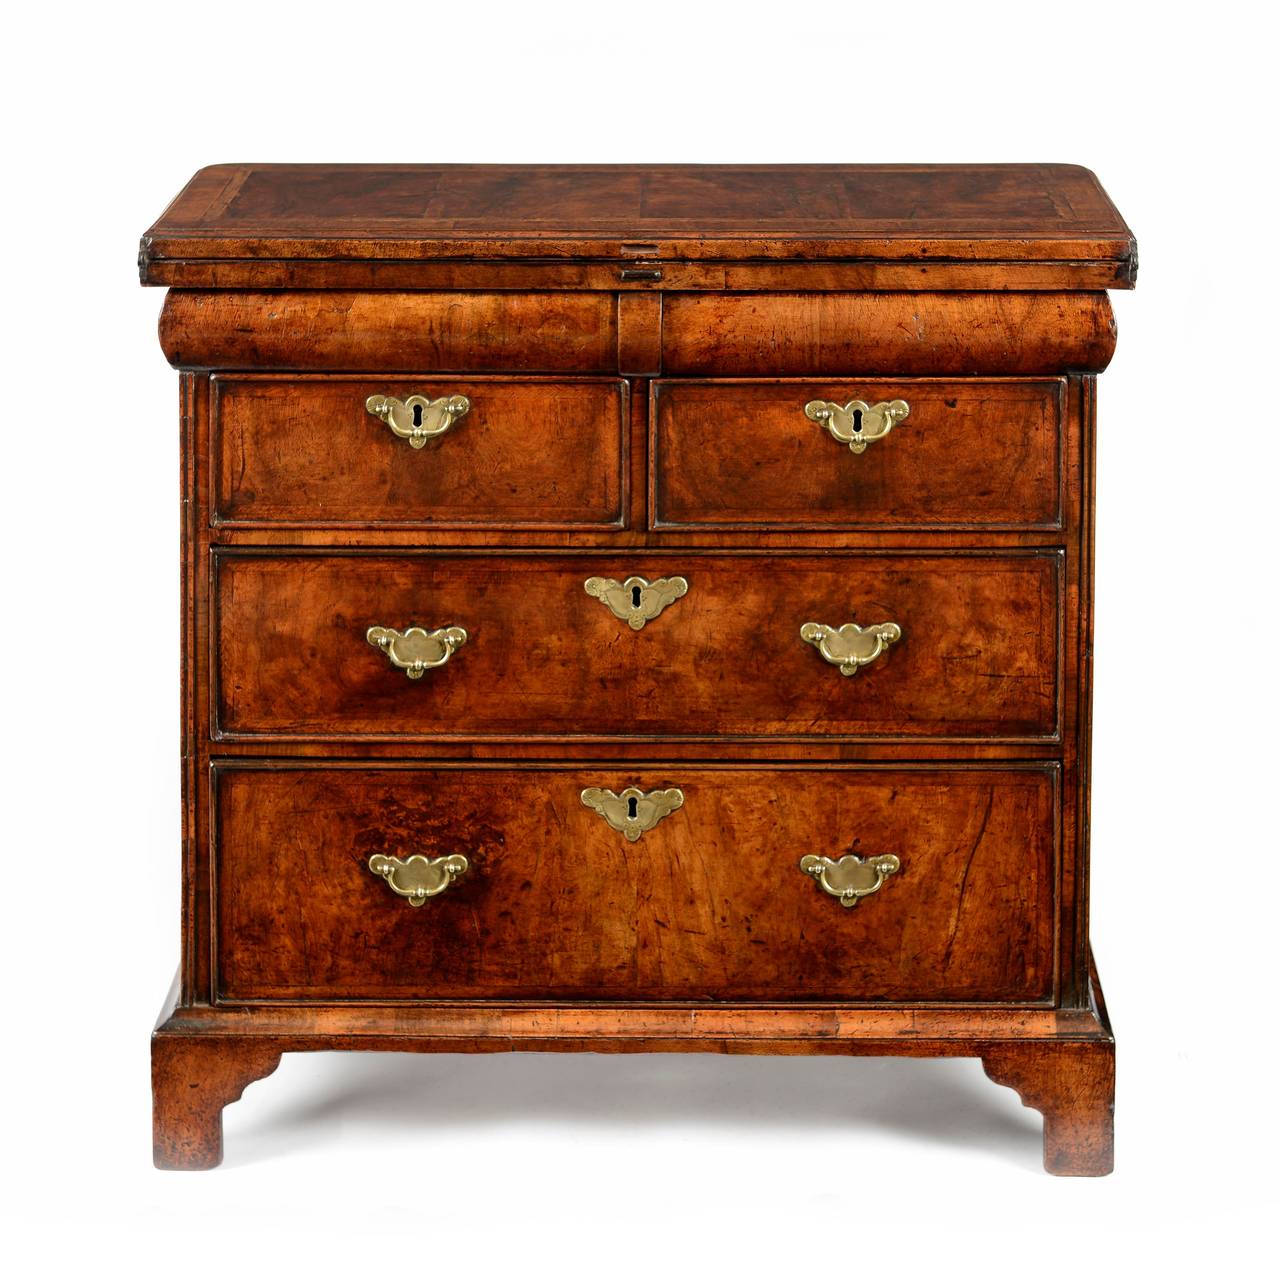 A fine and very rare George I walnut and feather banded bachelor chest with an unusual cushion waist. The top with a cross and feather banded top laid with veneers in a double book matched fashion. Opening the top reveals a very similar layout of